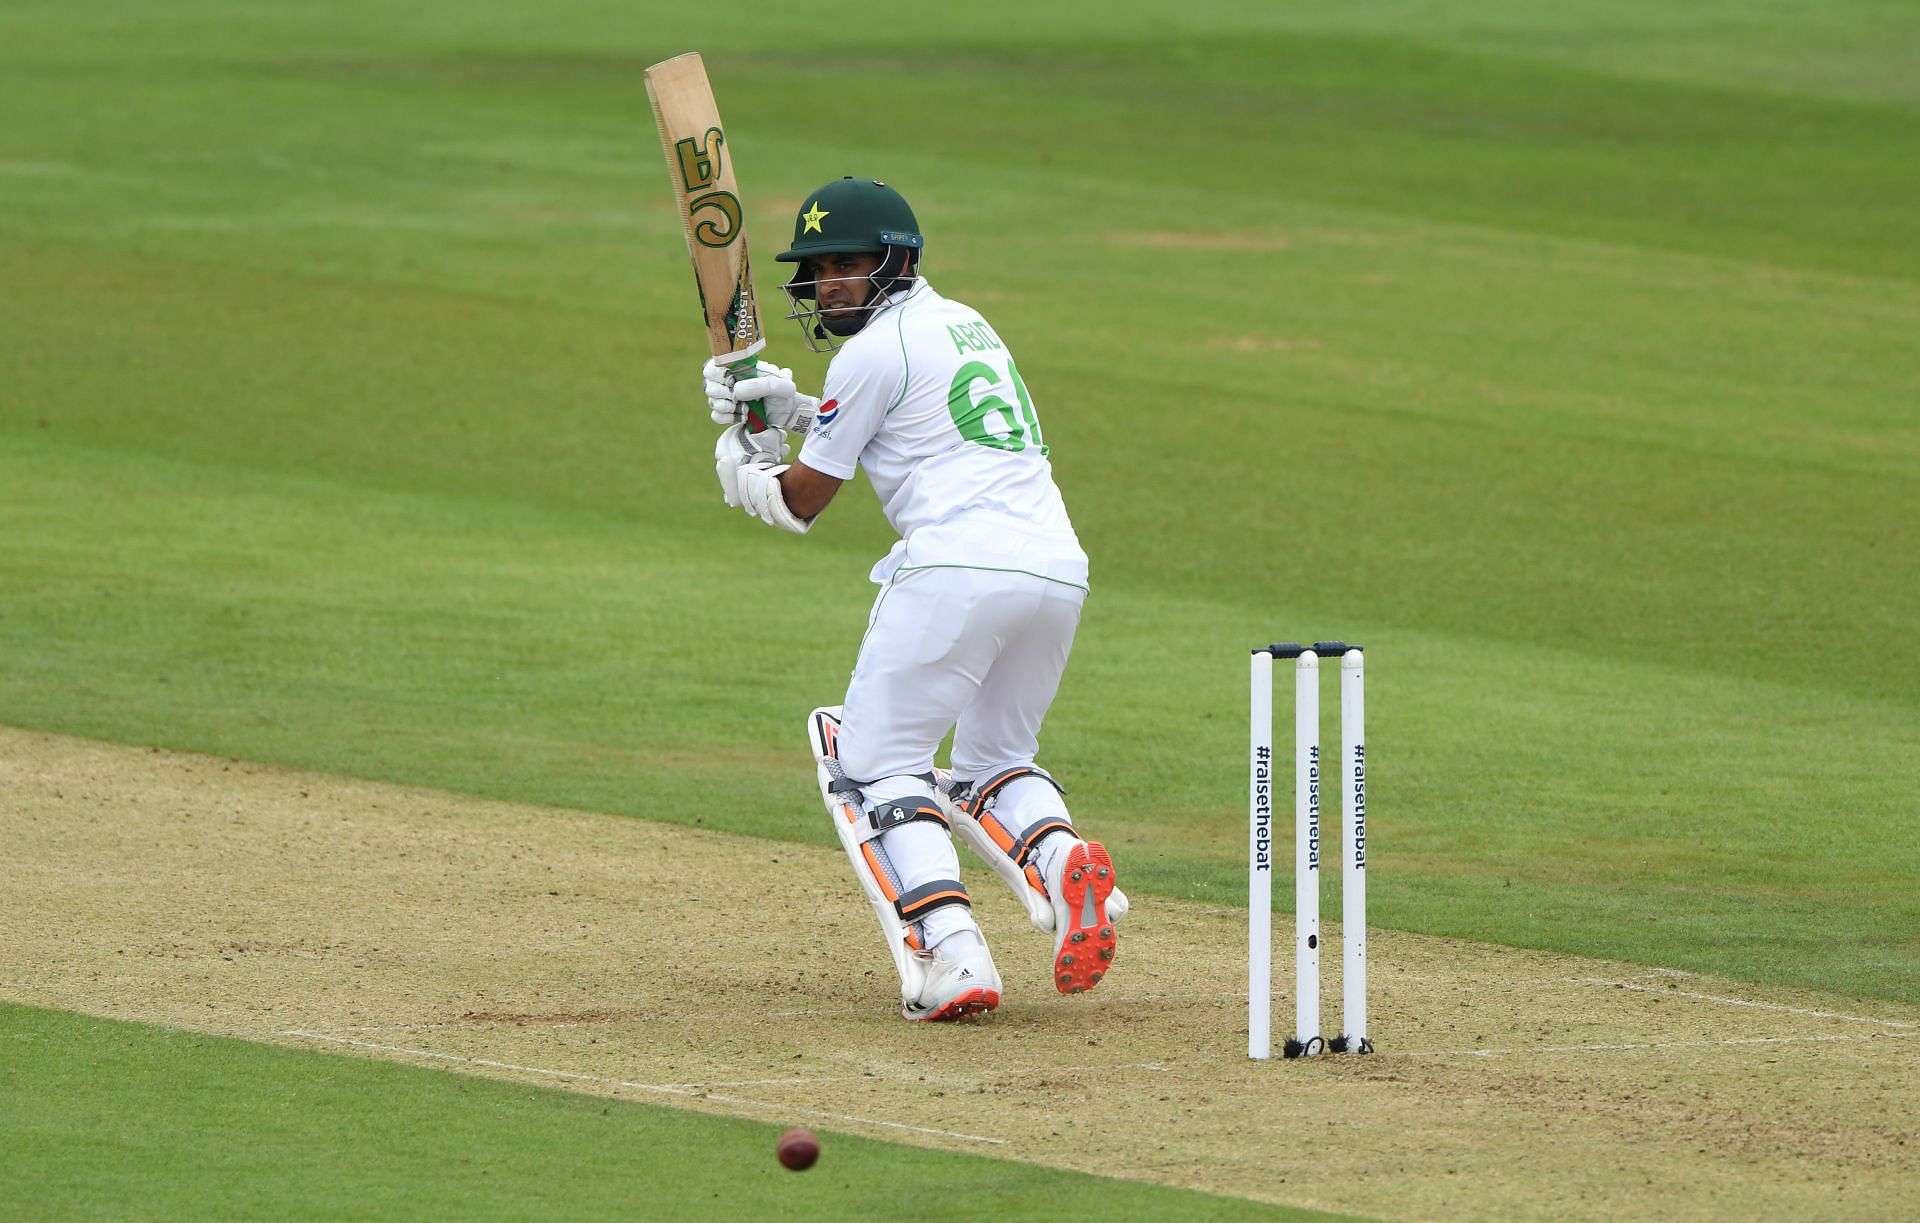 Abid Ali will look to play a match-winning knock once again.